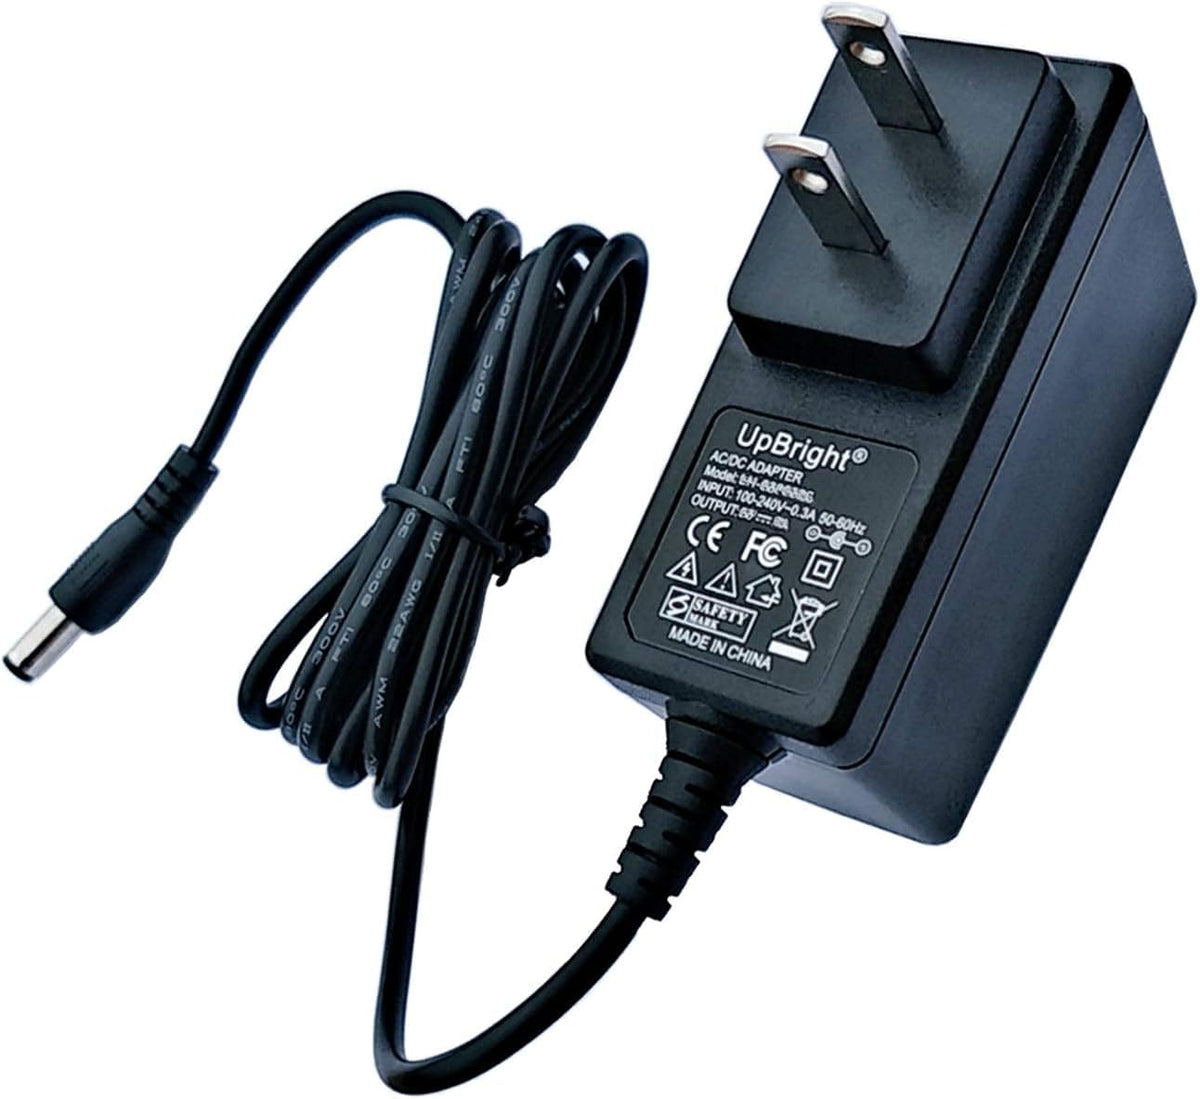 Innovative Yealink YEA-SIP-T54W [5 PHONE PACK] Power Adapters Included - Ships within 1 Bus. Day - Free Shipping - USA Trading Depot, LLC